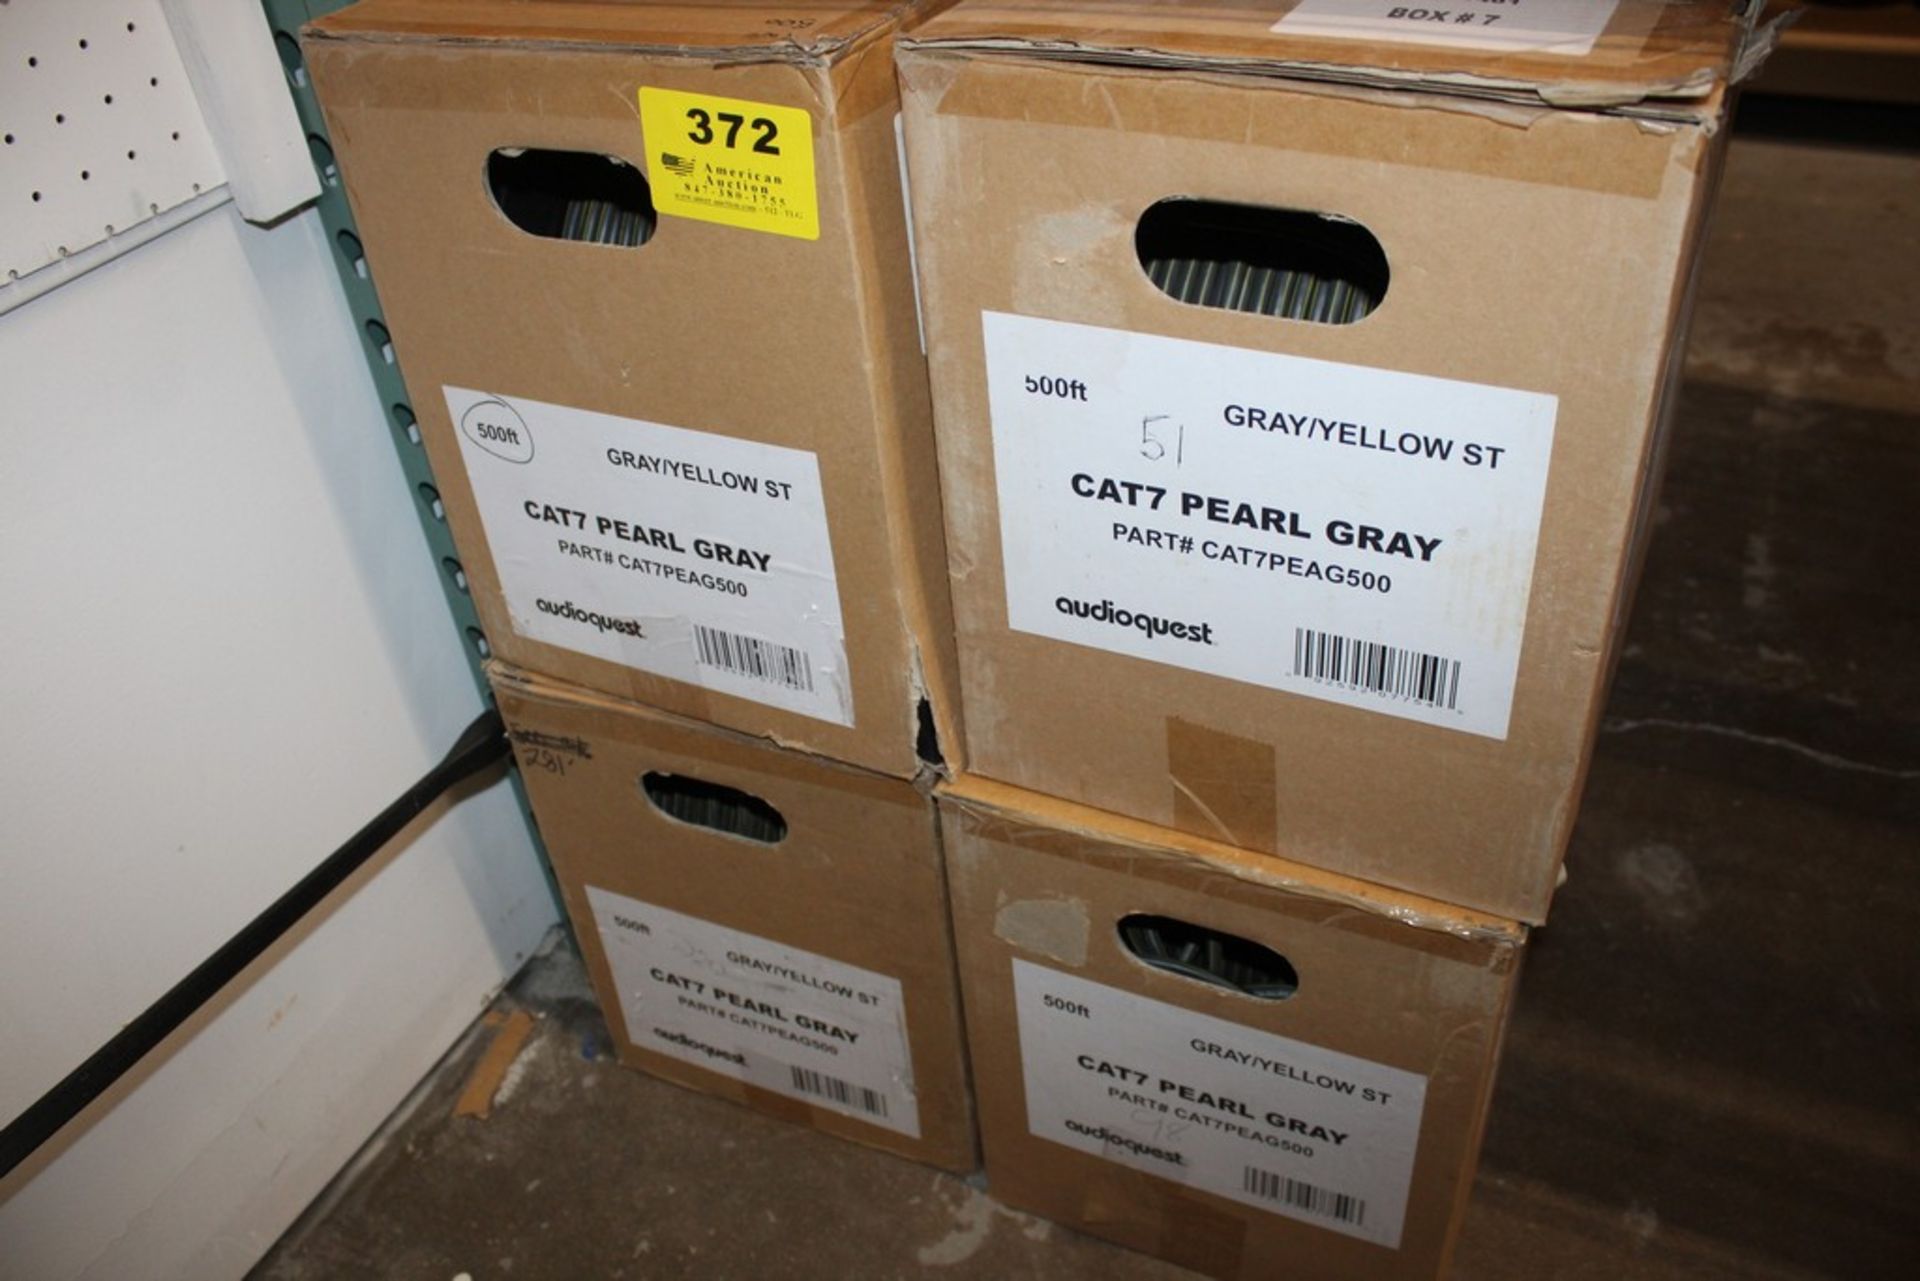 (4) BOXES OF AUDIOQUEST CAT7 PEARL GRAY